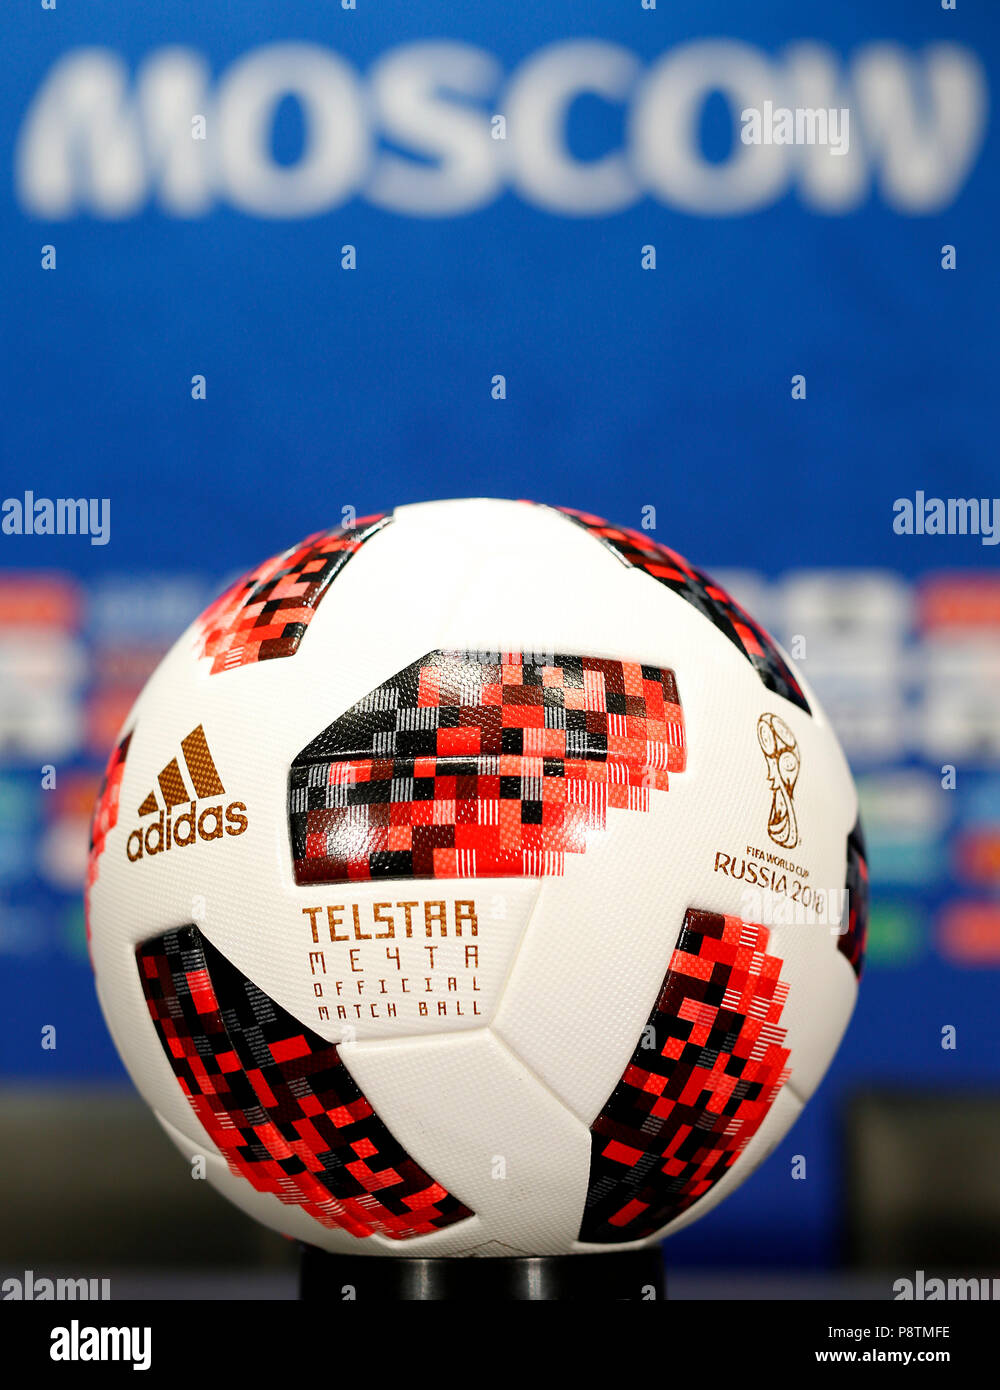 Moscow, Russia. 13th July, 2018. GENERAL PICTURES MOSCOW 2018 - Adidas  Telstar ball at the table, ahead of FIFA President Gianni Infantino's  preonfconference at the Luzhniki stadium in Moscow, Russia. (Photo: Rodolfo